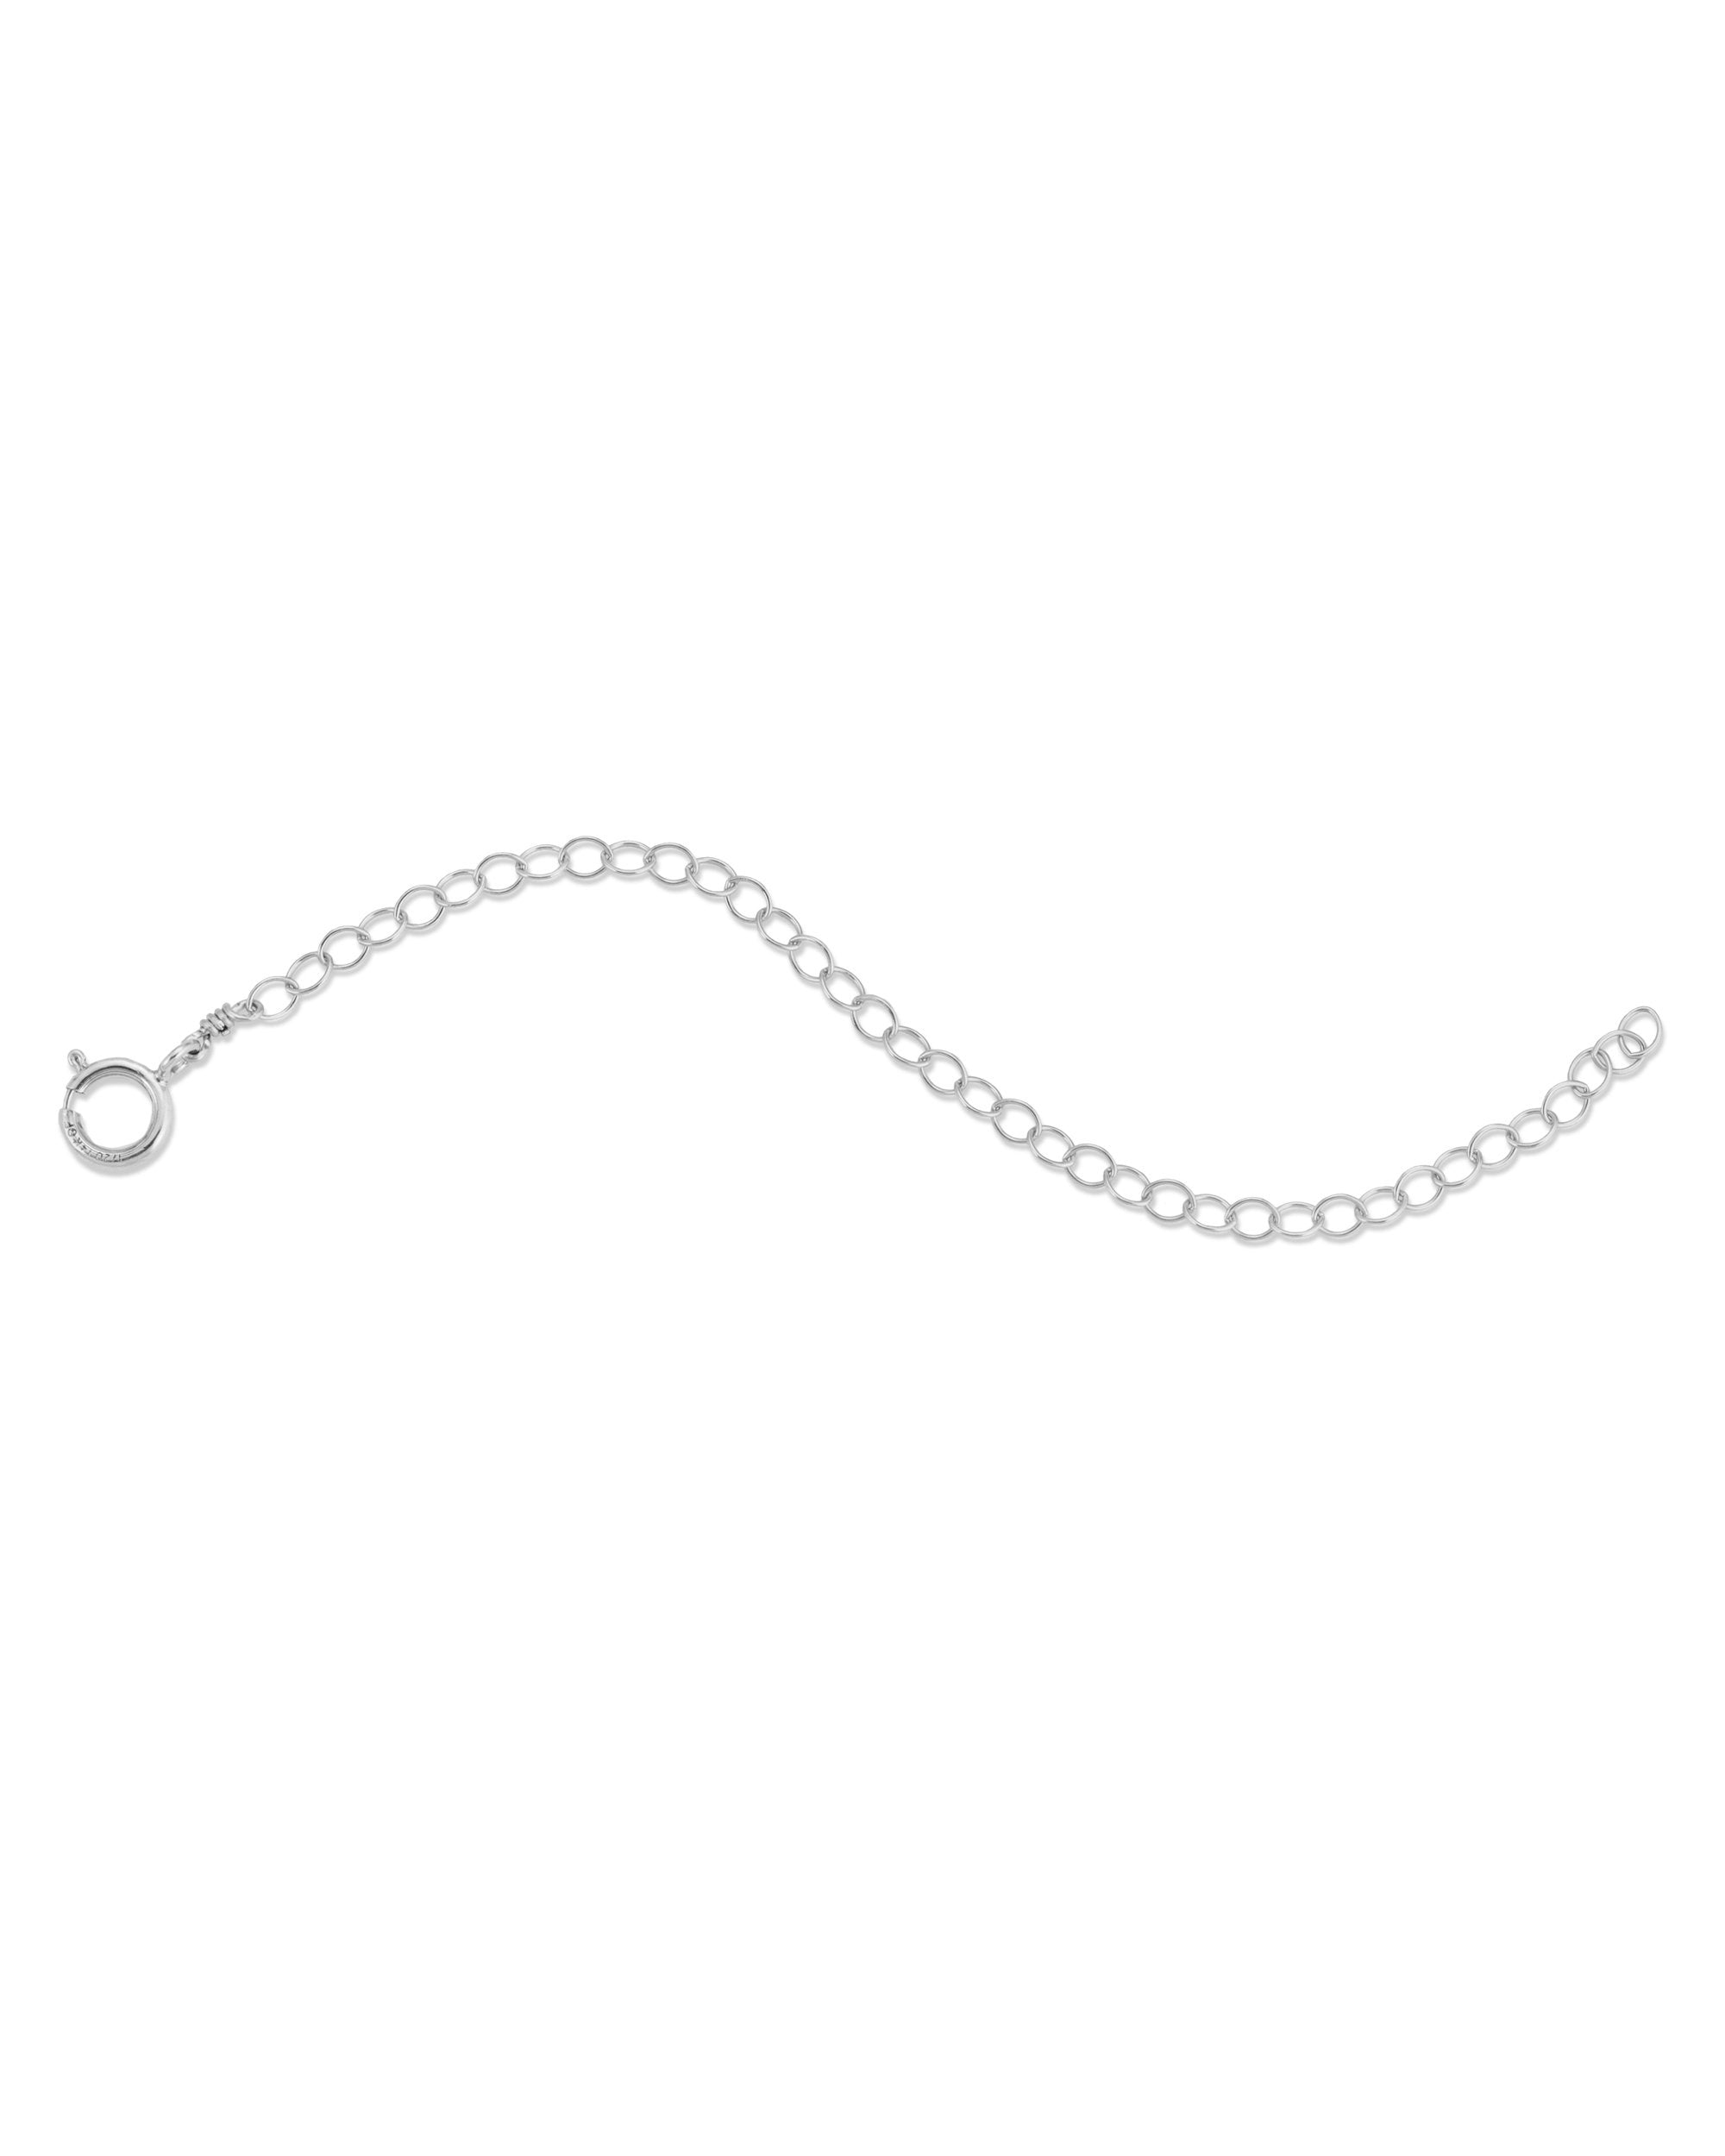 Extender Chain by KOZAKH. 3 inch long extender chain in Sterling Silver.